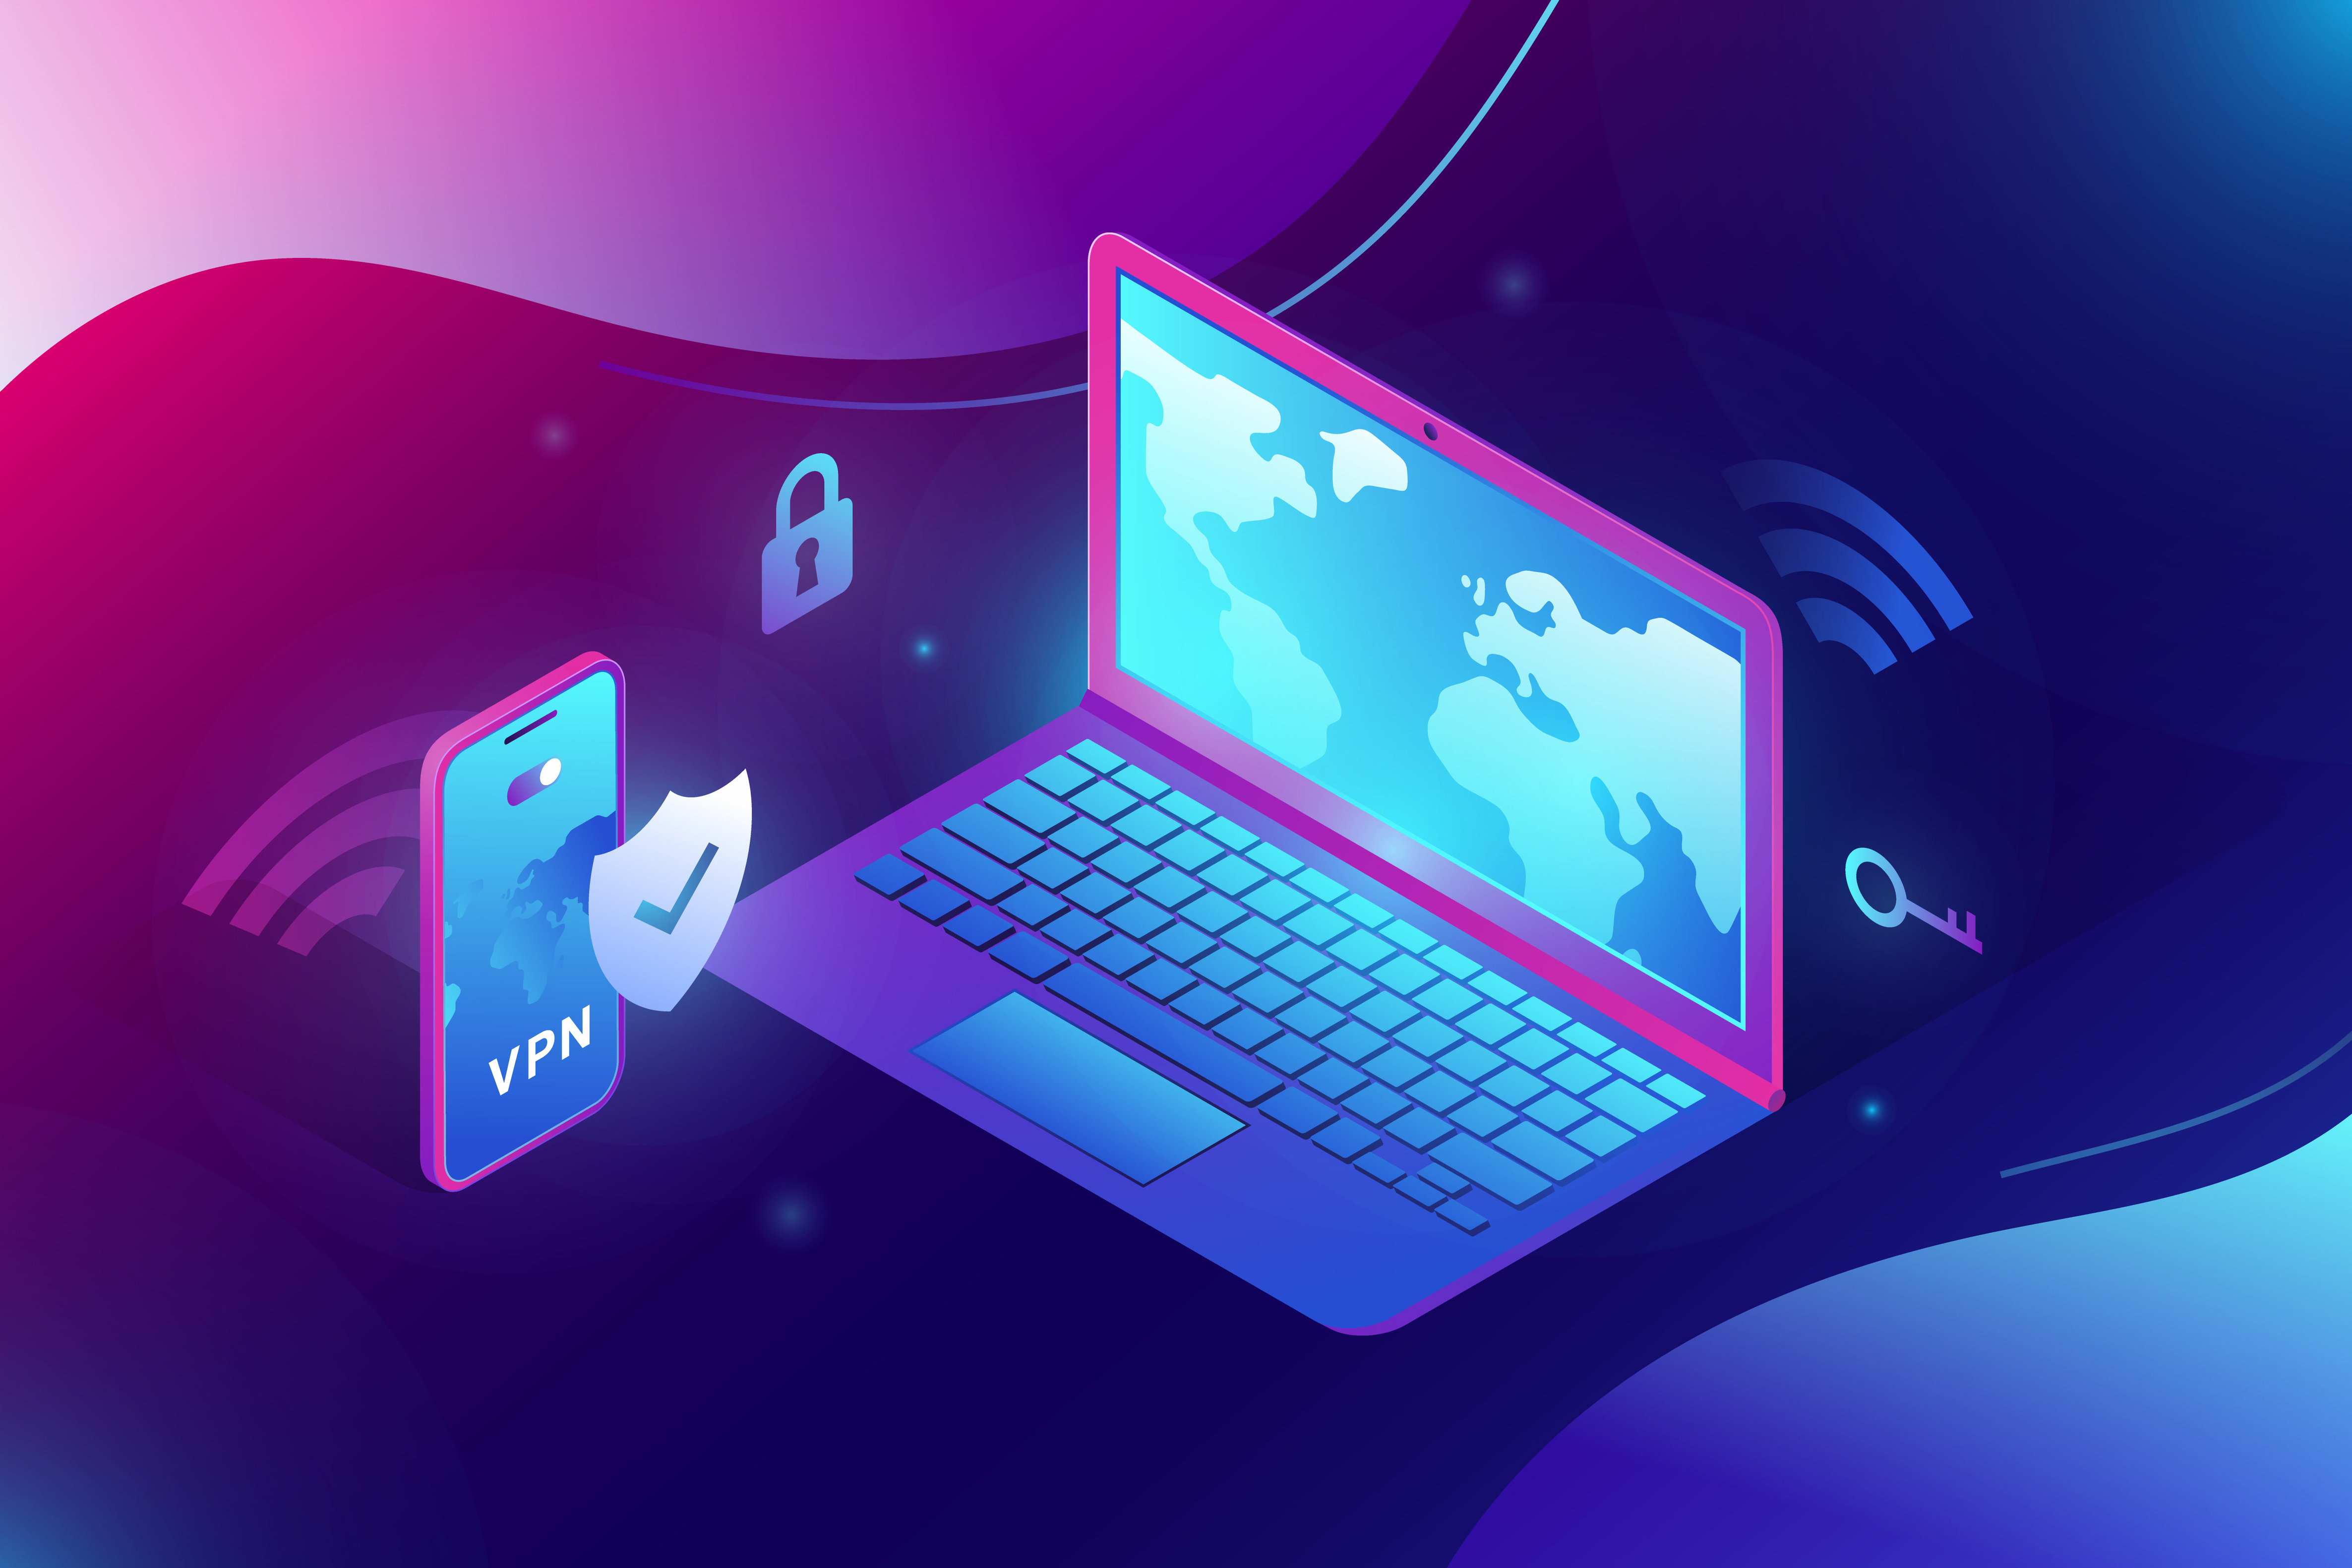 Featured image: Devices on a corporate VPN network  - Why Your Business Needs a VPN for Optimal Security and Flexibility